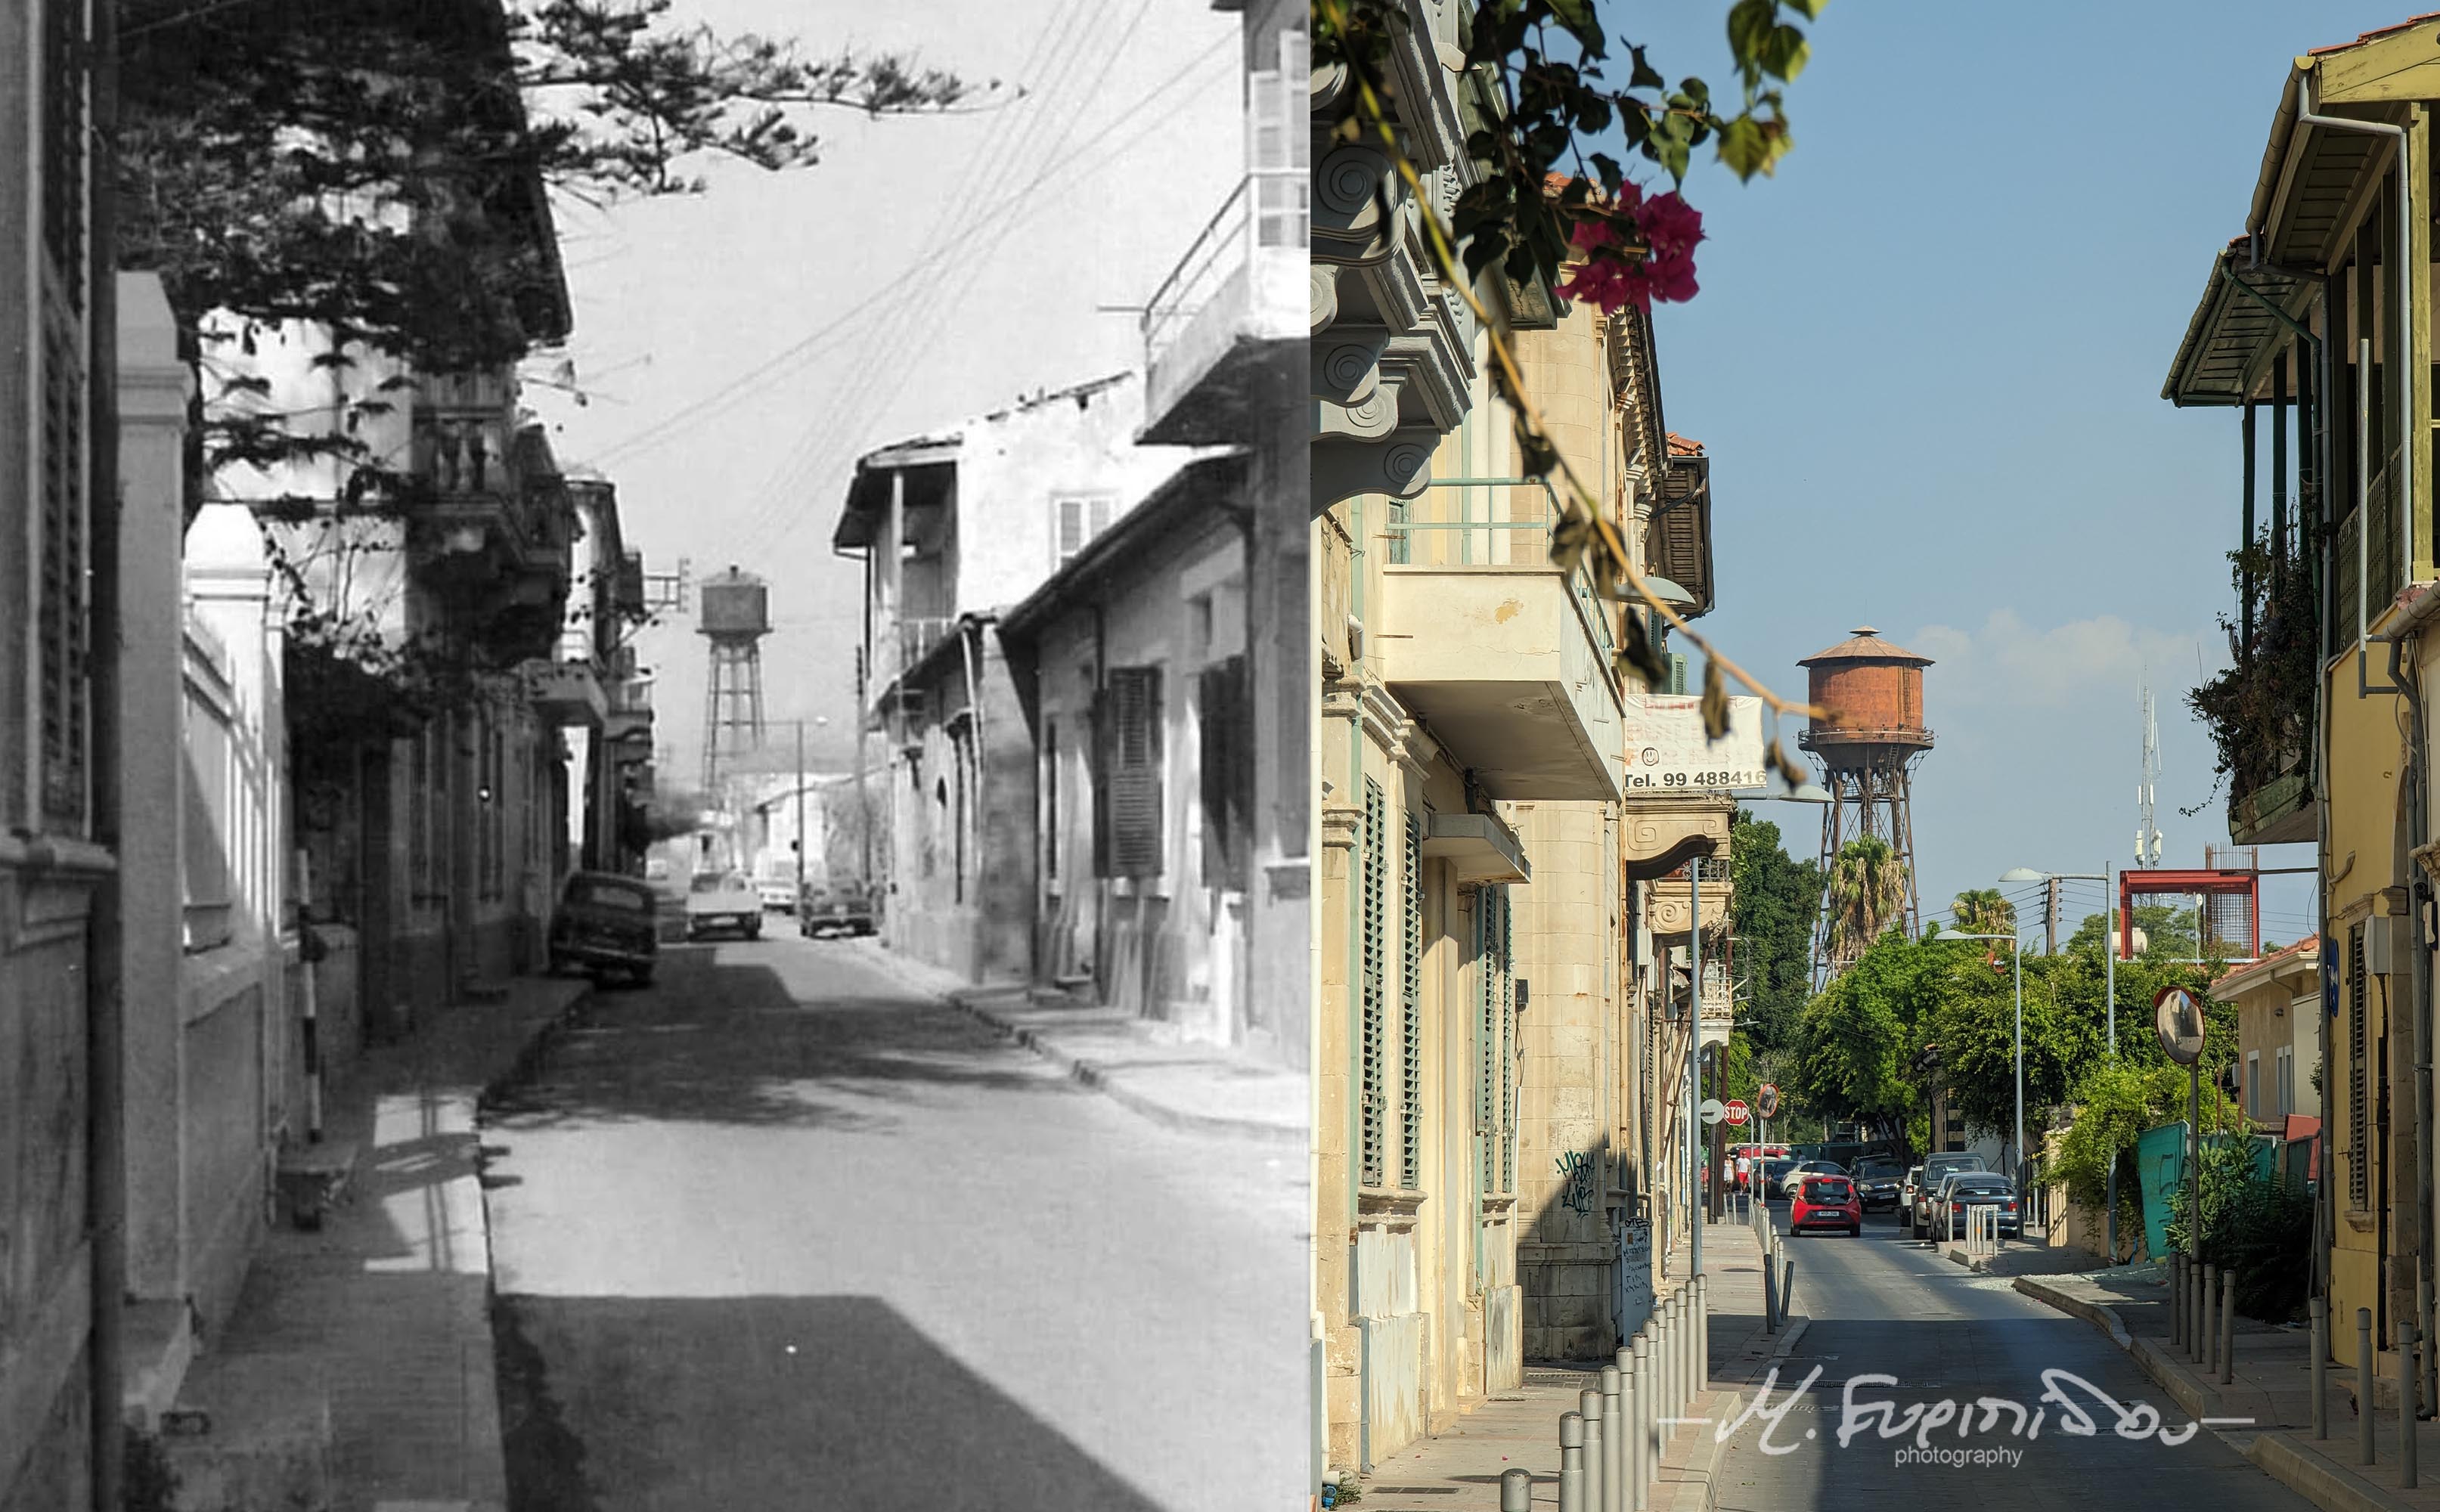 Cyprus-Irinis street then and now